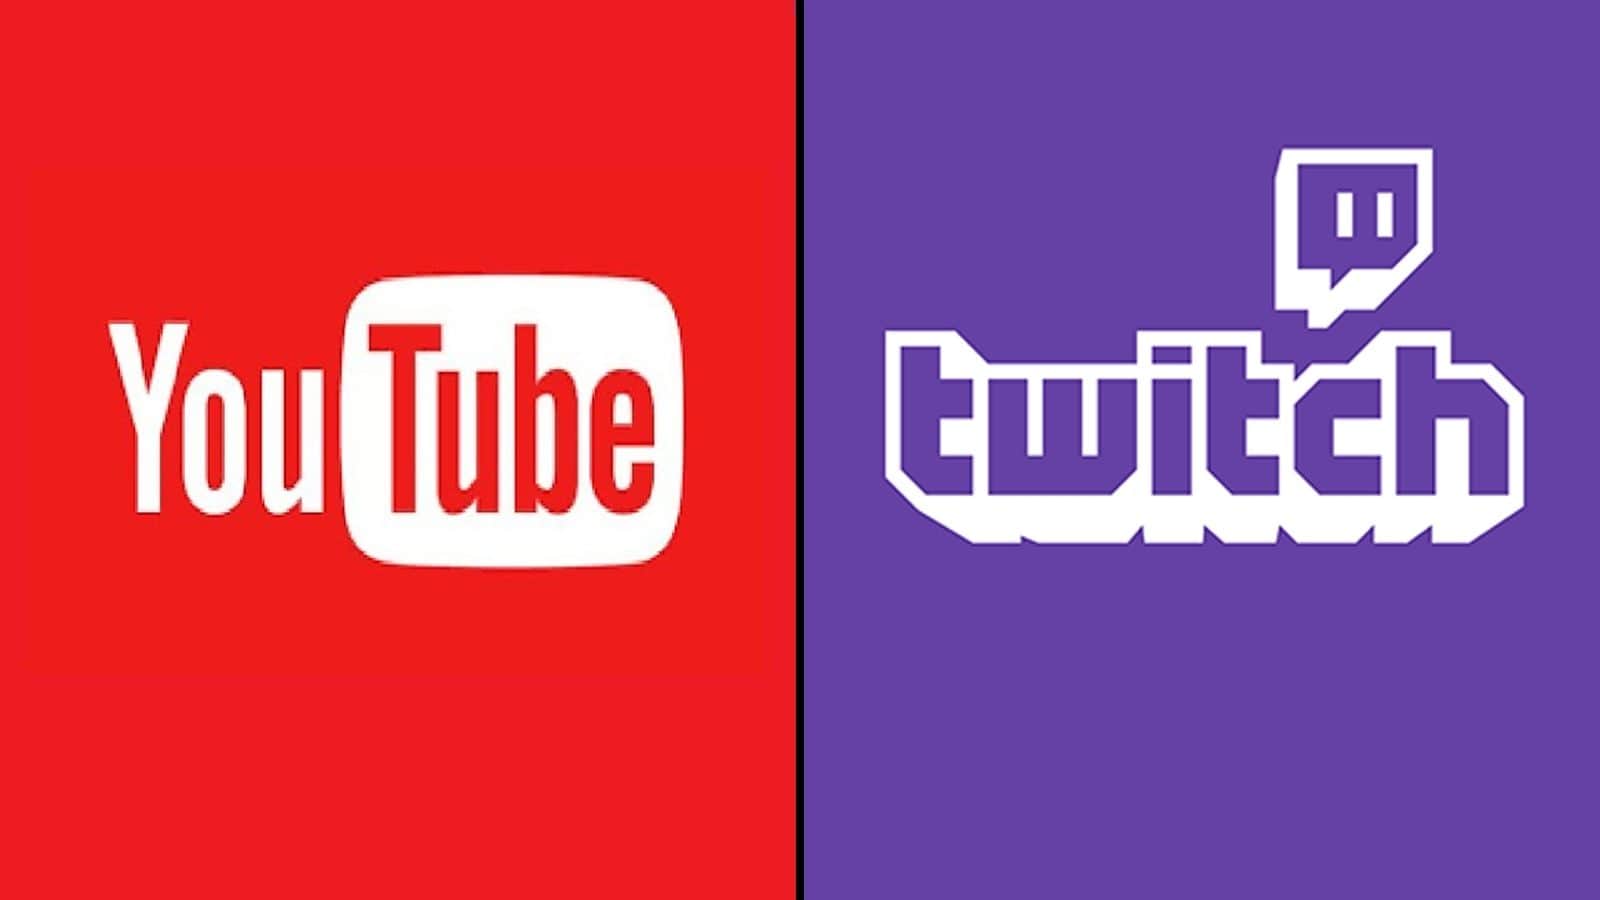 YouTube and Twitch logo